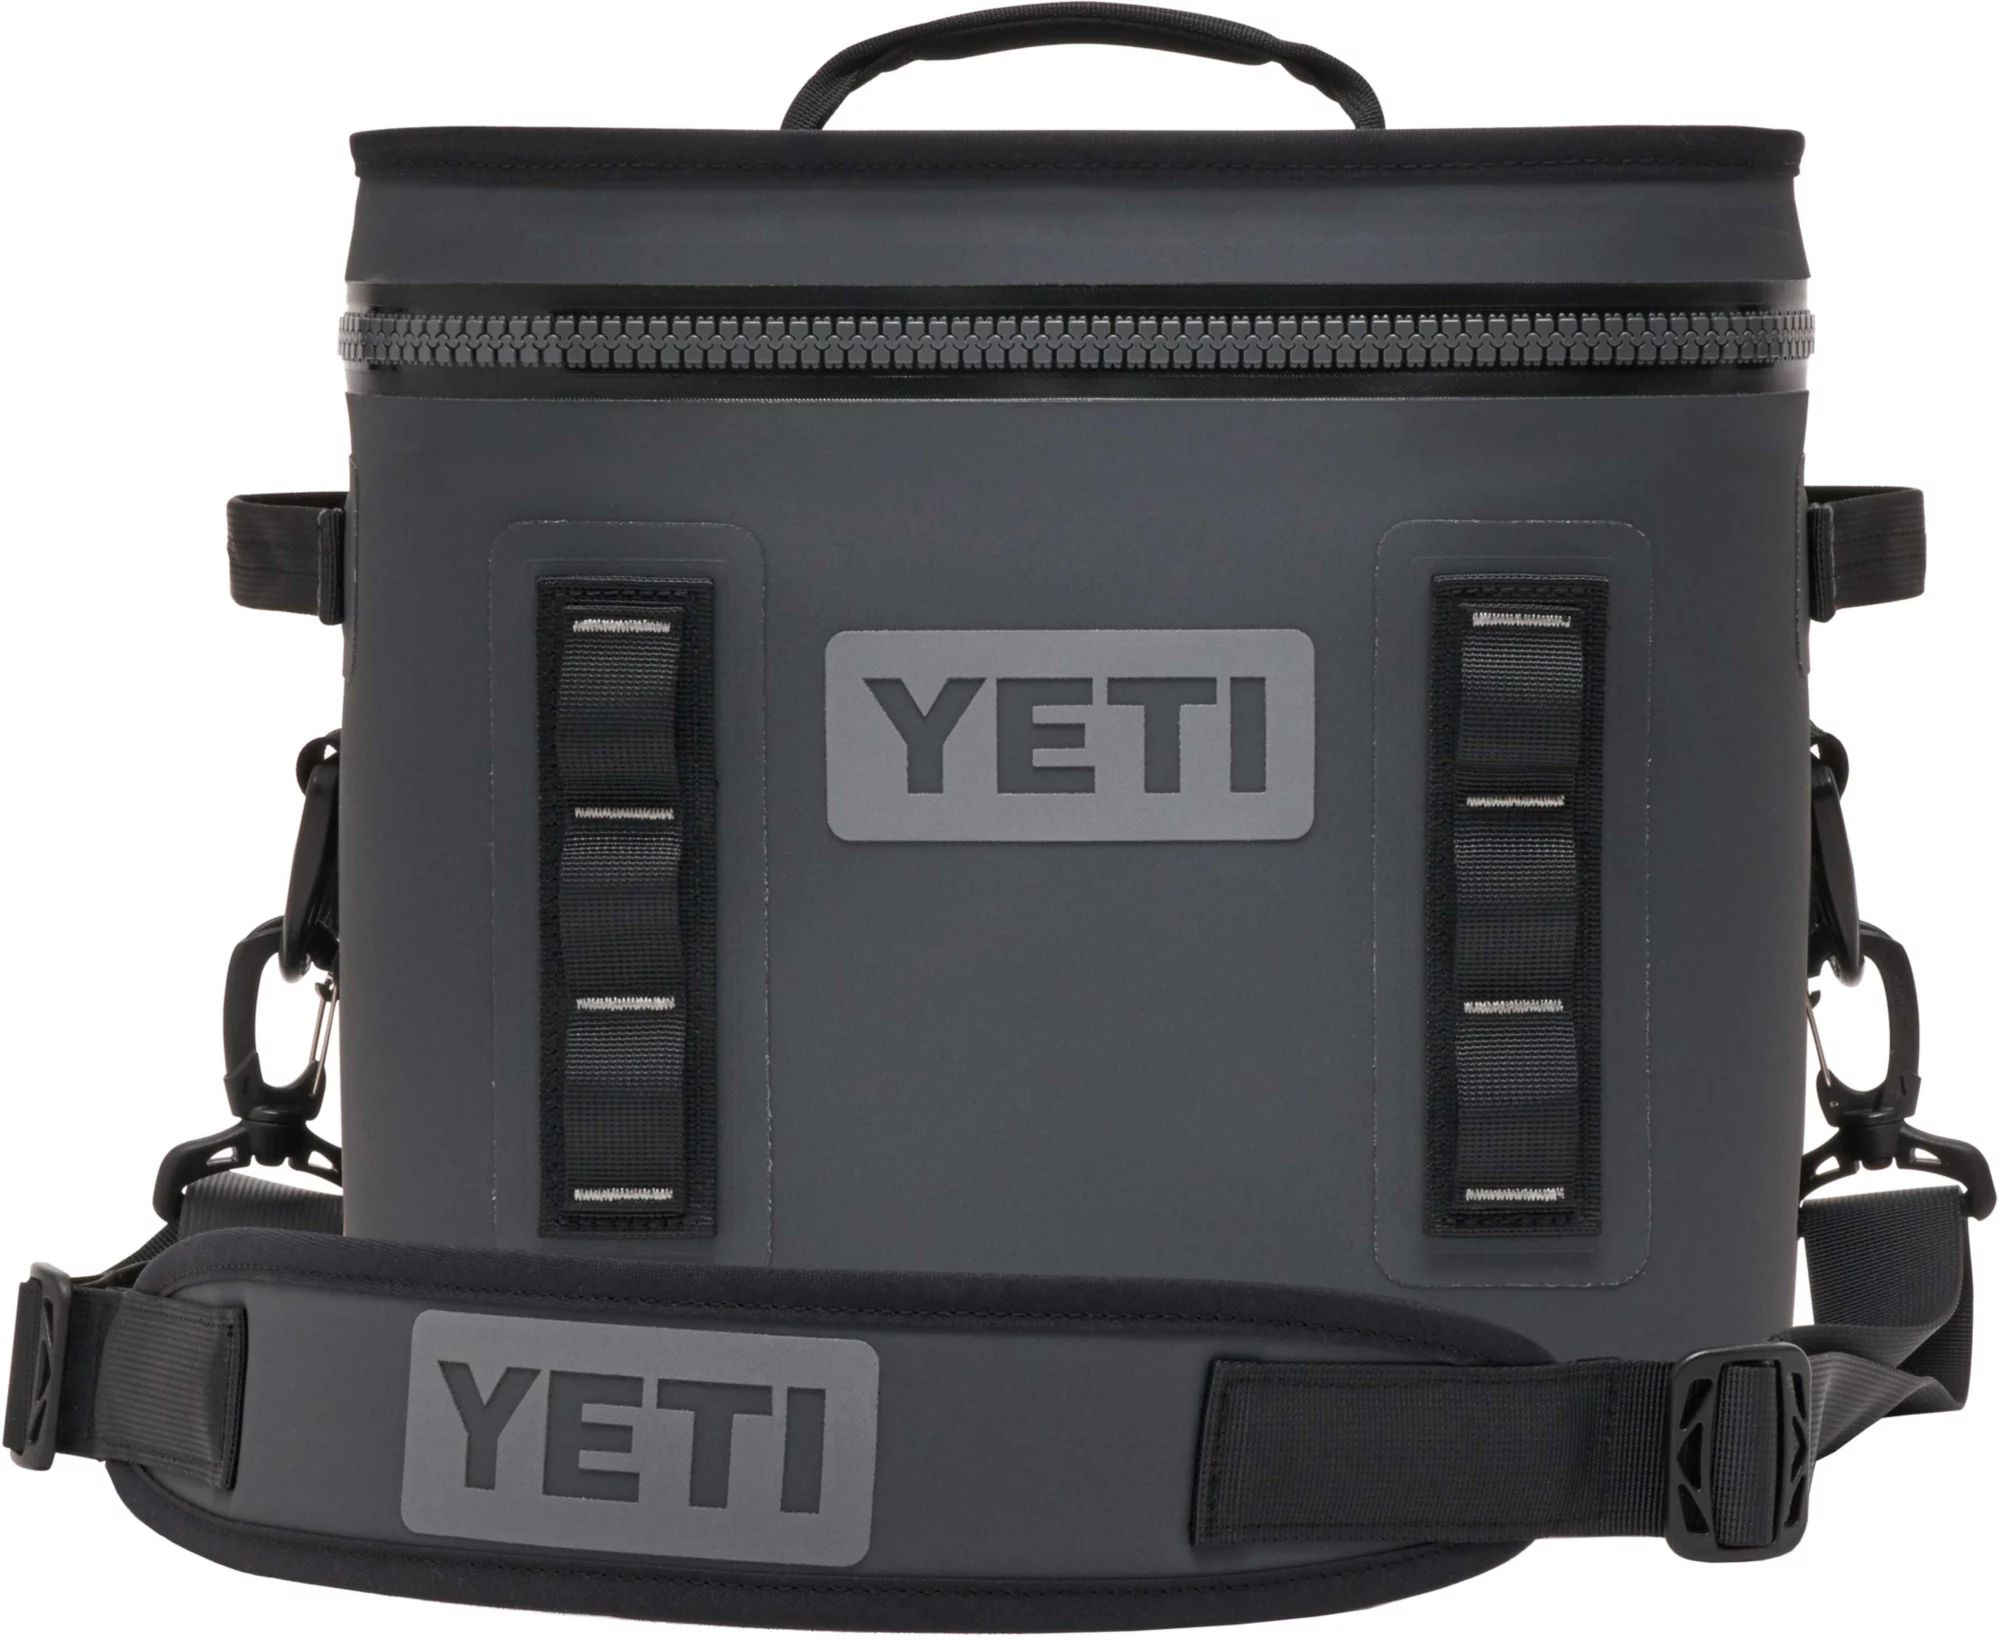 YETI Hopper Flip 12 Cooler with Top Handle, ice | Dick's Sporting Goods